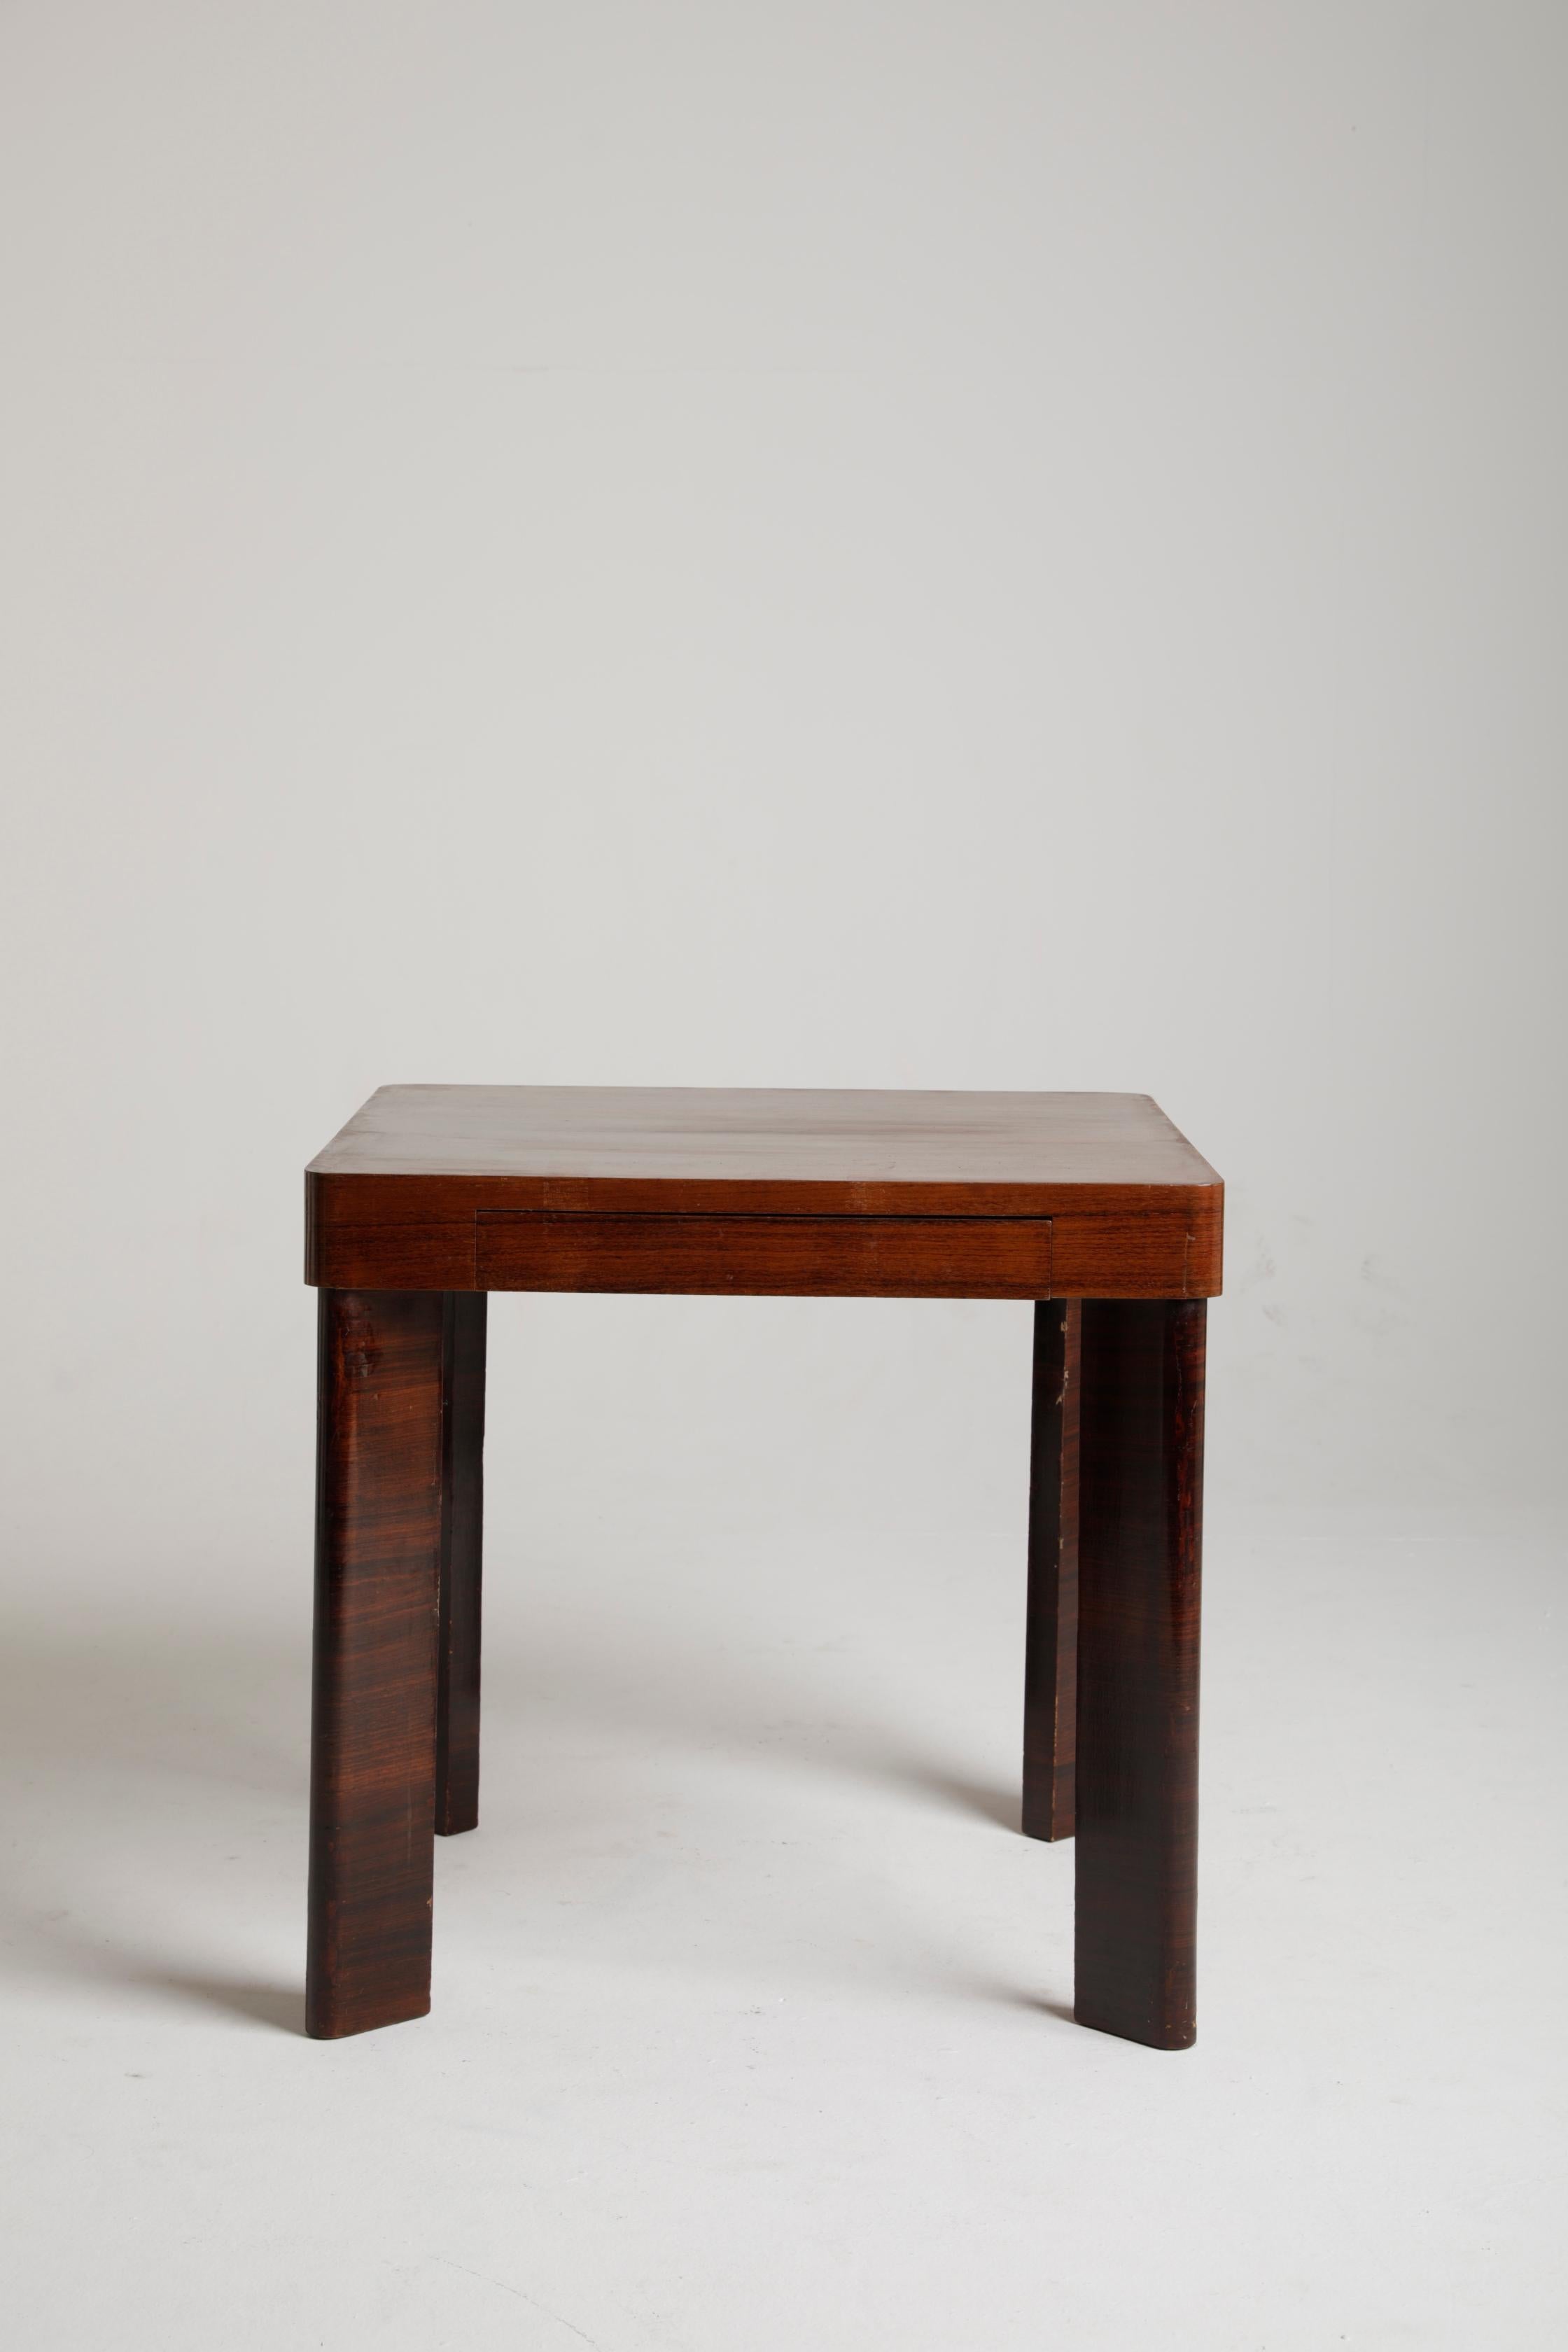 Art Deco Art Déco Wooden Game Table by Melchiorre Bega, 1935 Ca